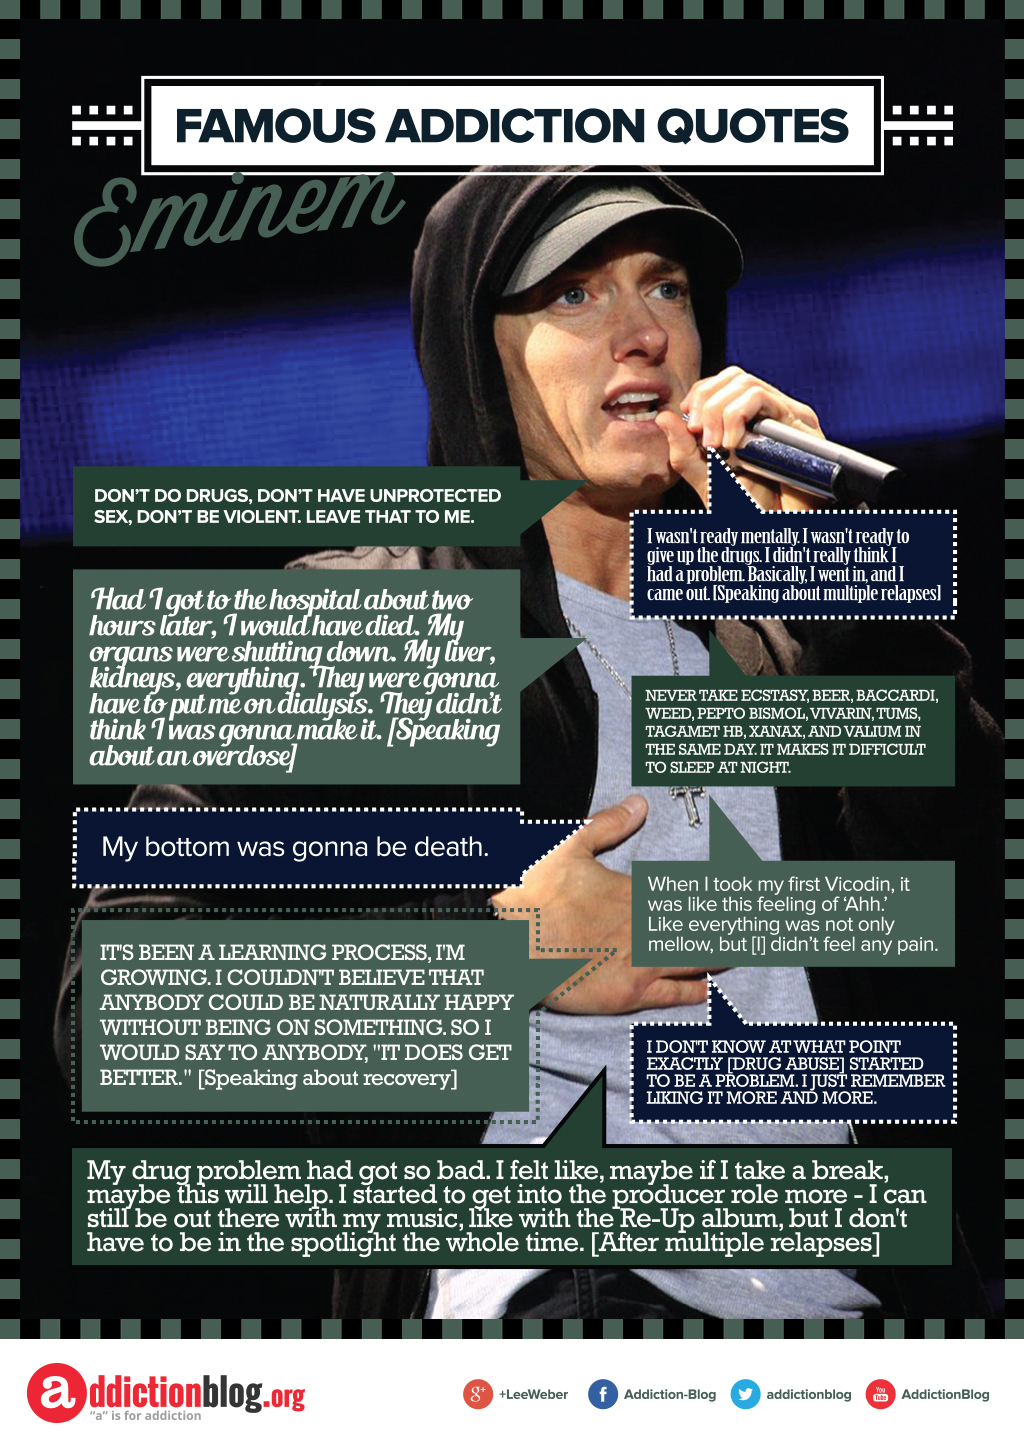 Eminem’s quotes on drugs and addiction recovery (INFOGRAPHIC)